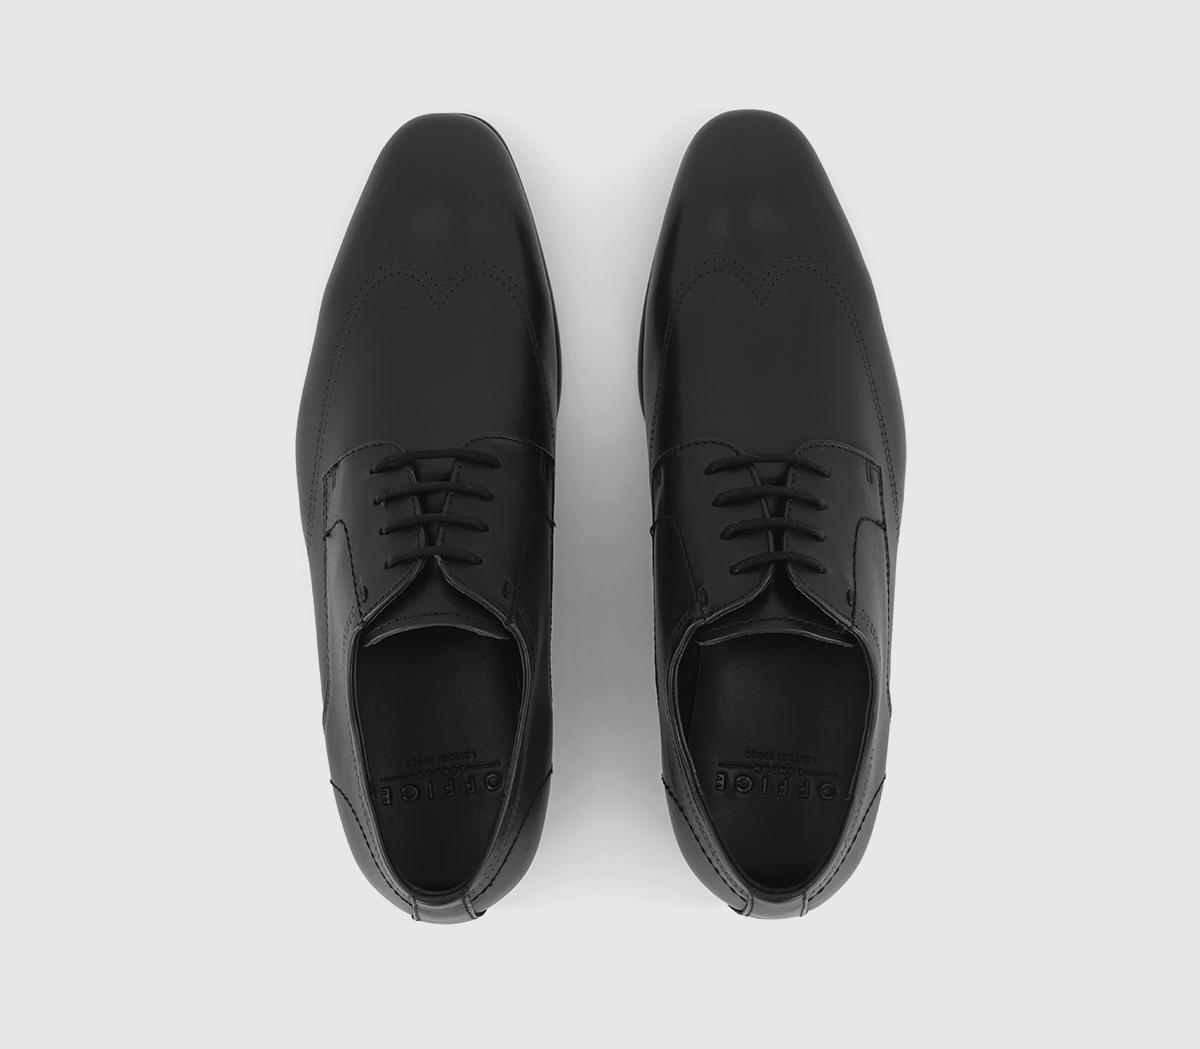 OFFICE Magnus Wingcap Leather Oxford Shoes Black Leather - Men's Casual ...